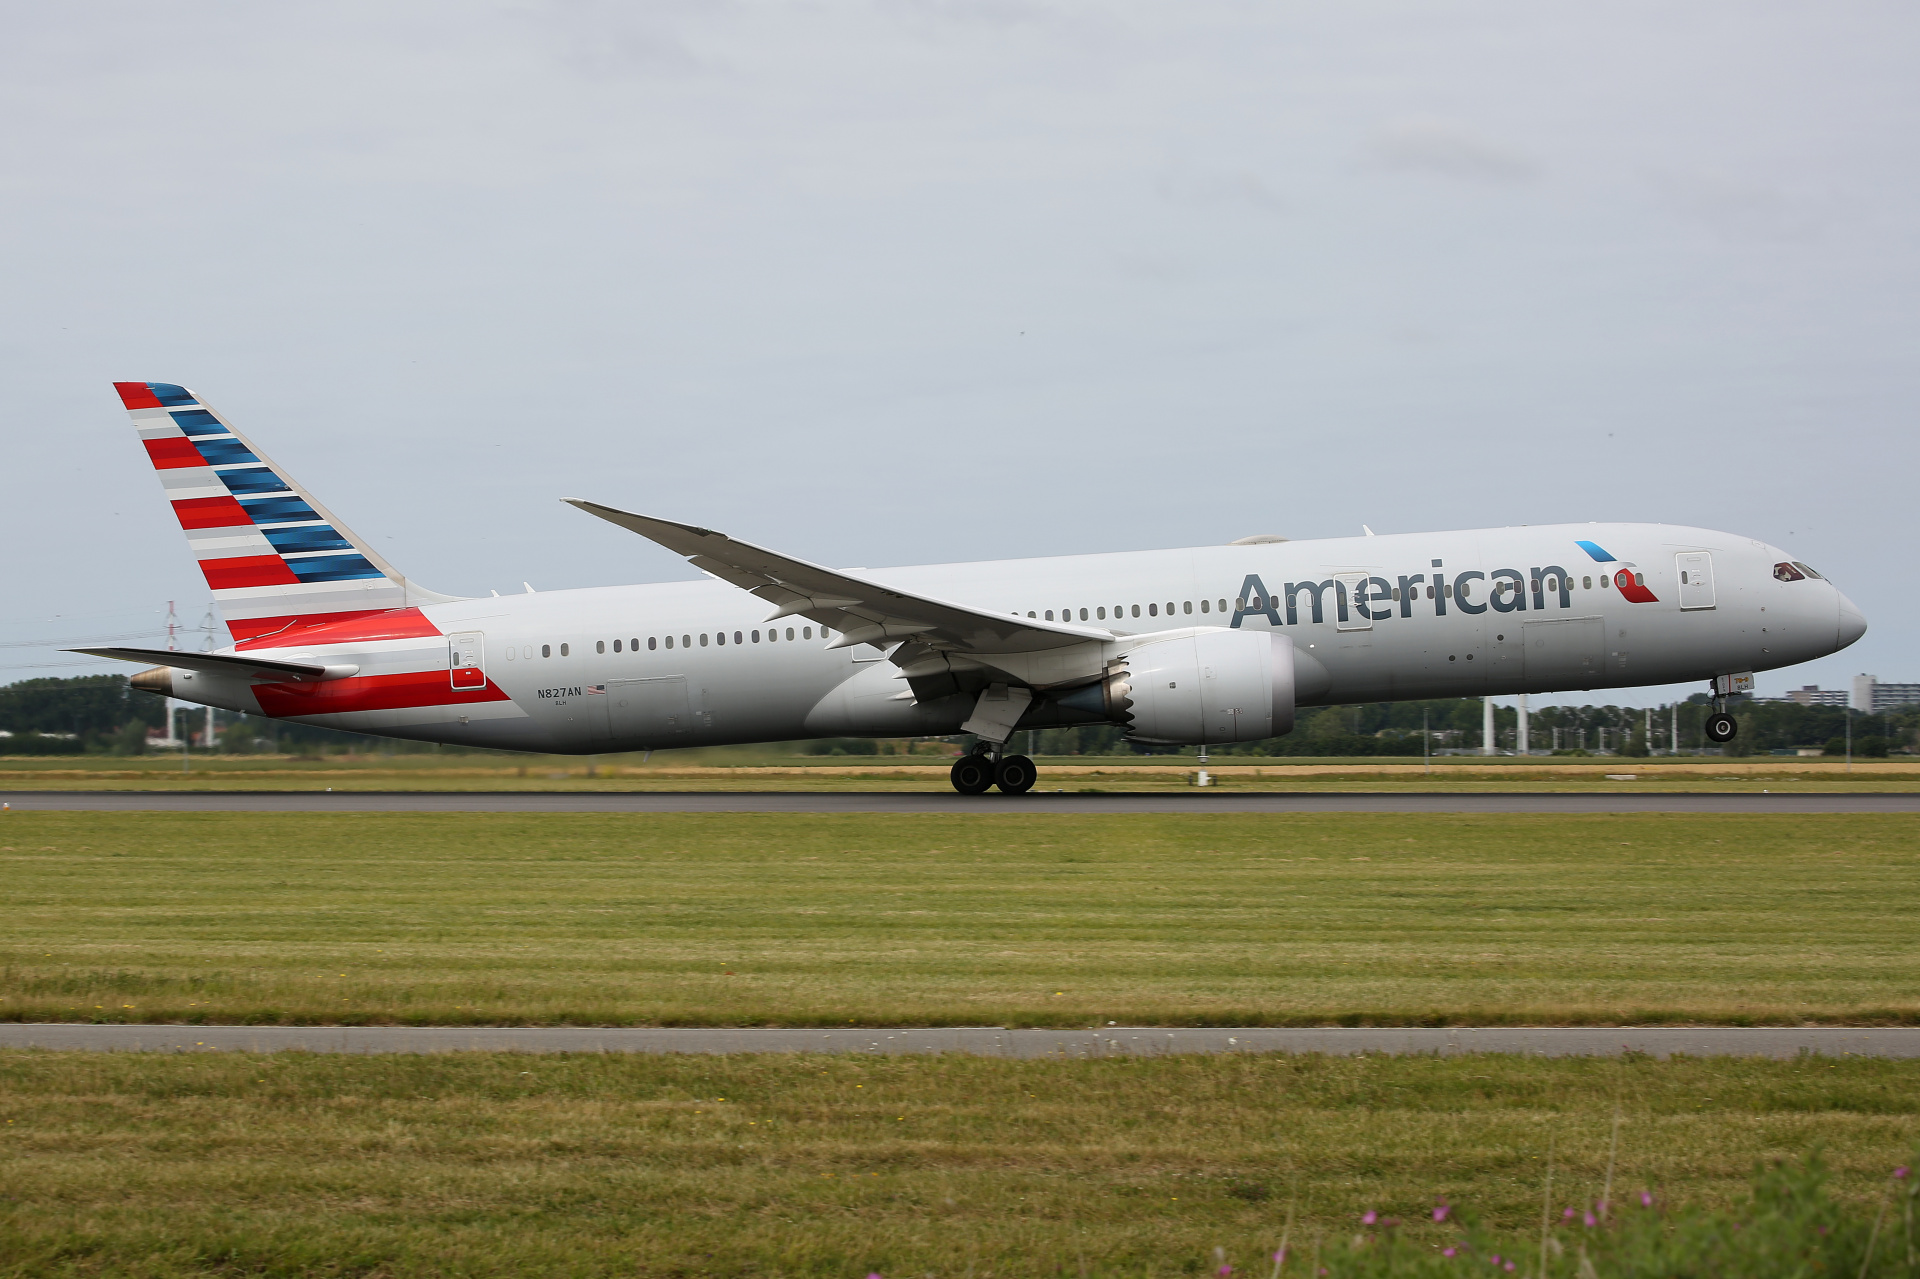 N827AN, American Airlines (Samoloty » Spotting na Schiphol » Boeing 787-9 Dreamliner)